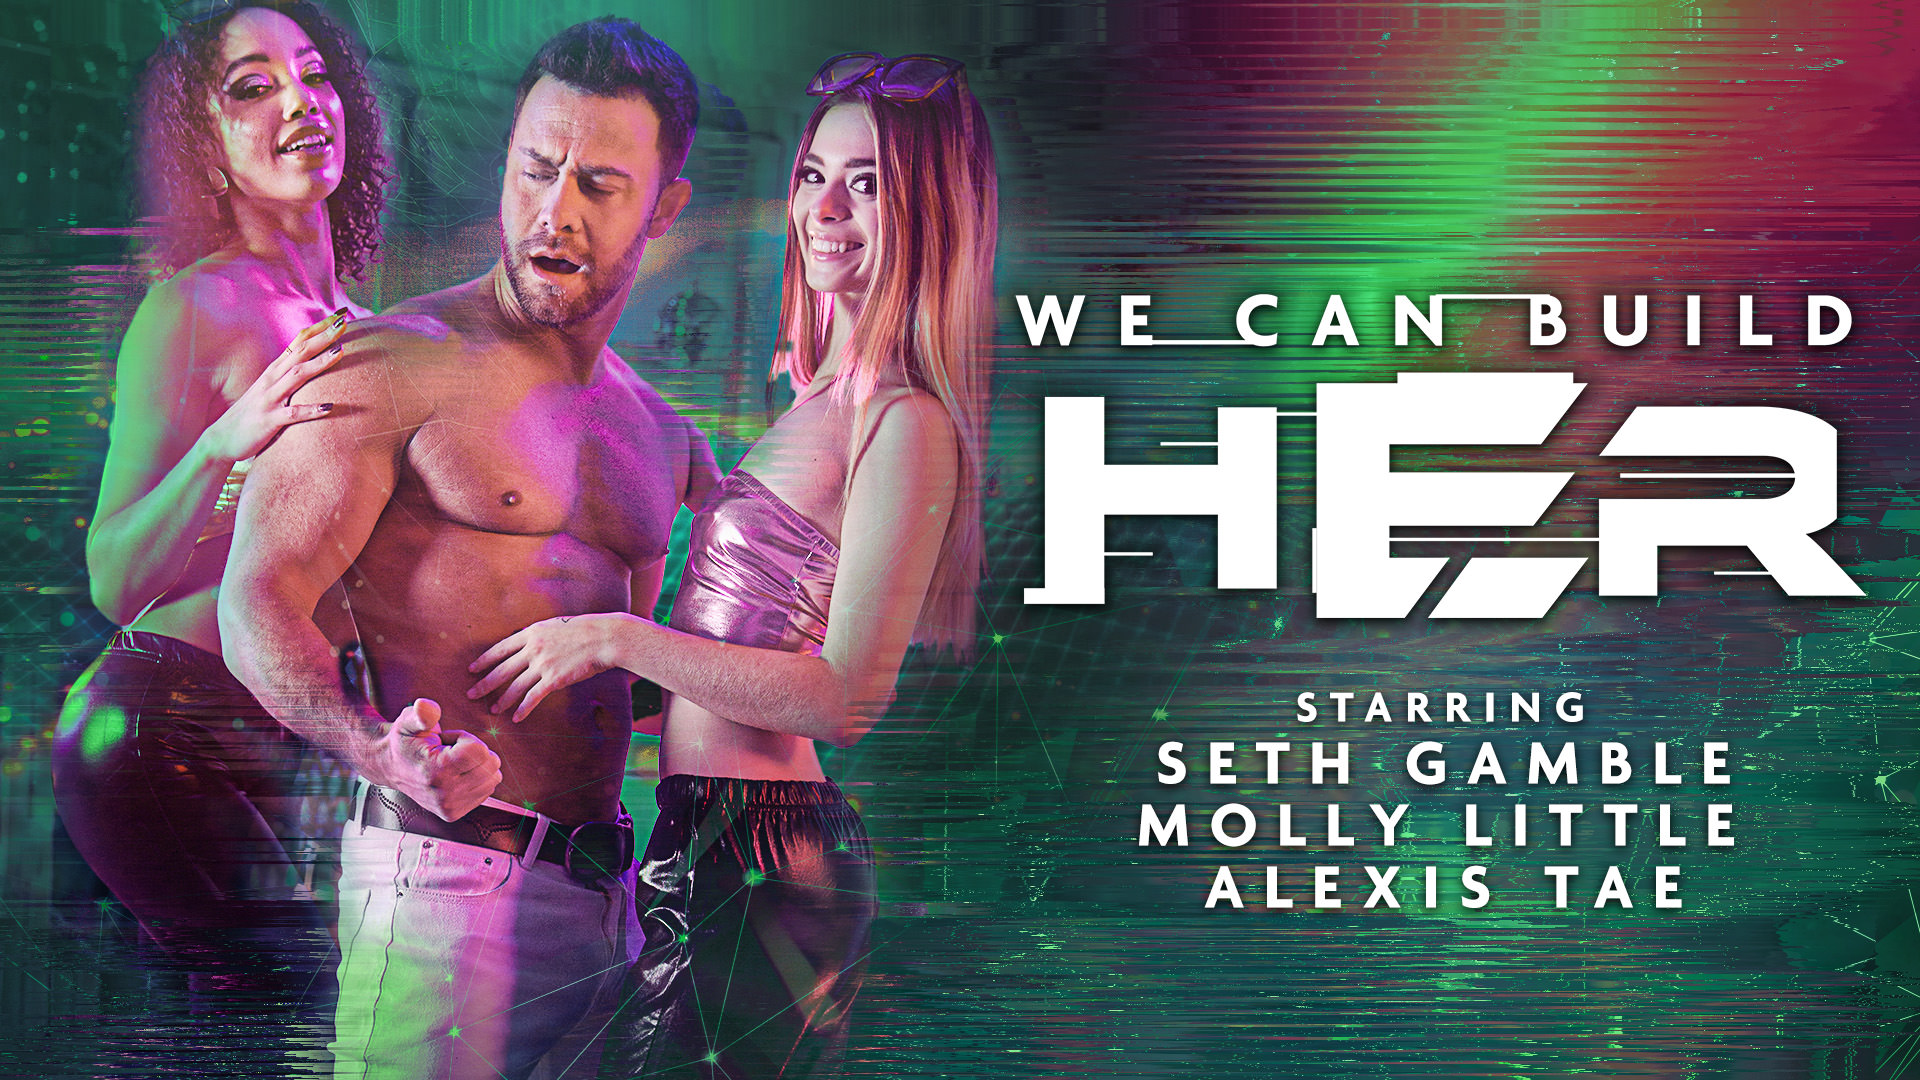 Wicked Seth Gamble, Alexis Tae, Molly Little, Shawn Alff – We Can Build Her – Scene 2